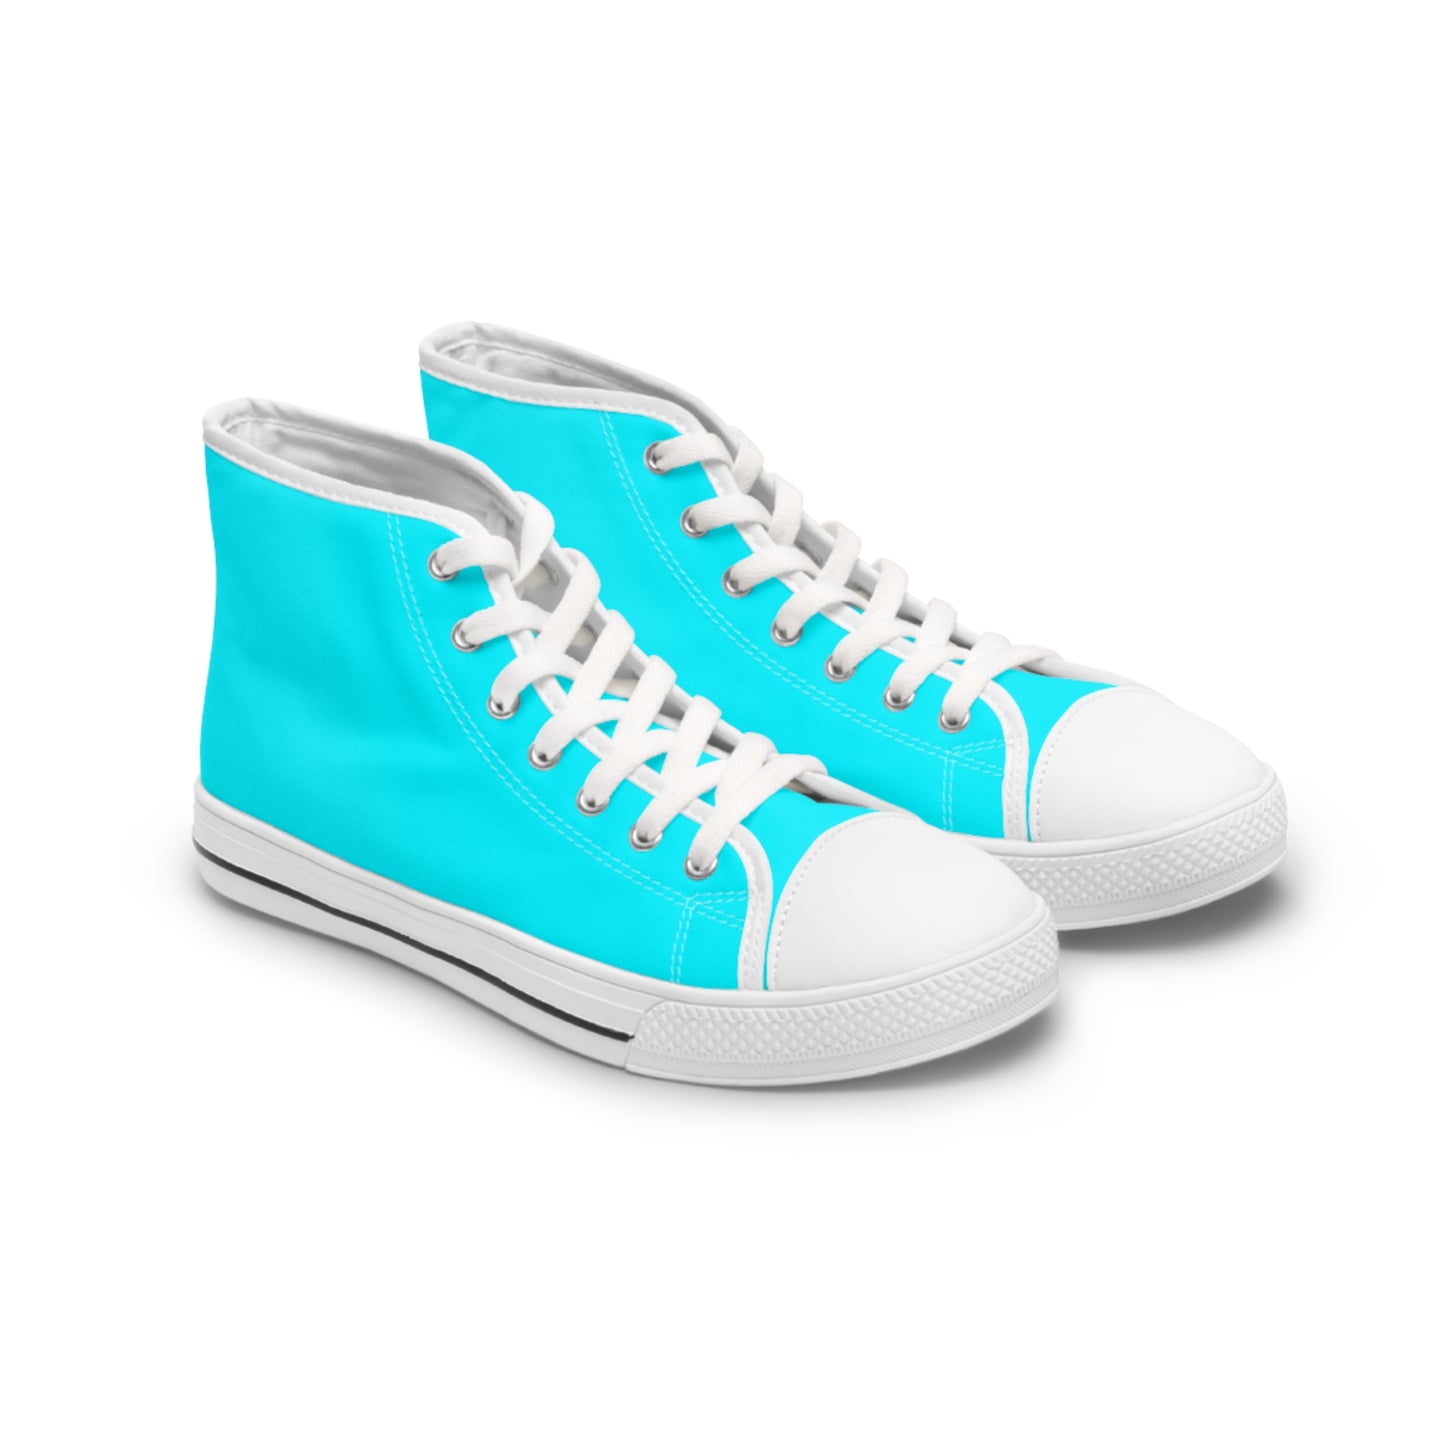 Women's Canvas High Top Solid Color Sneakers - Cool Pool Aqua Blue US 12 White sole